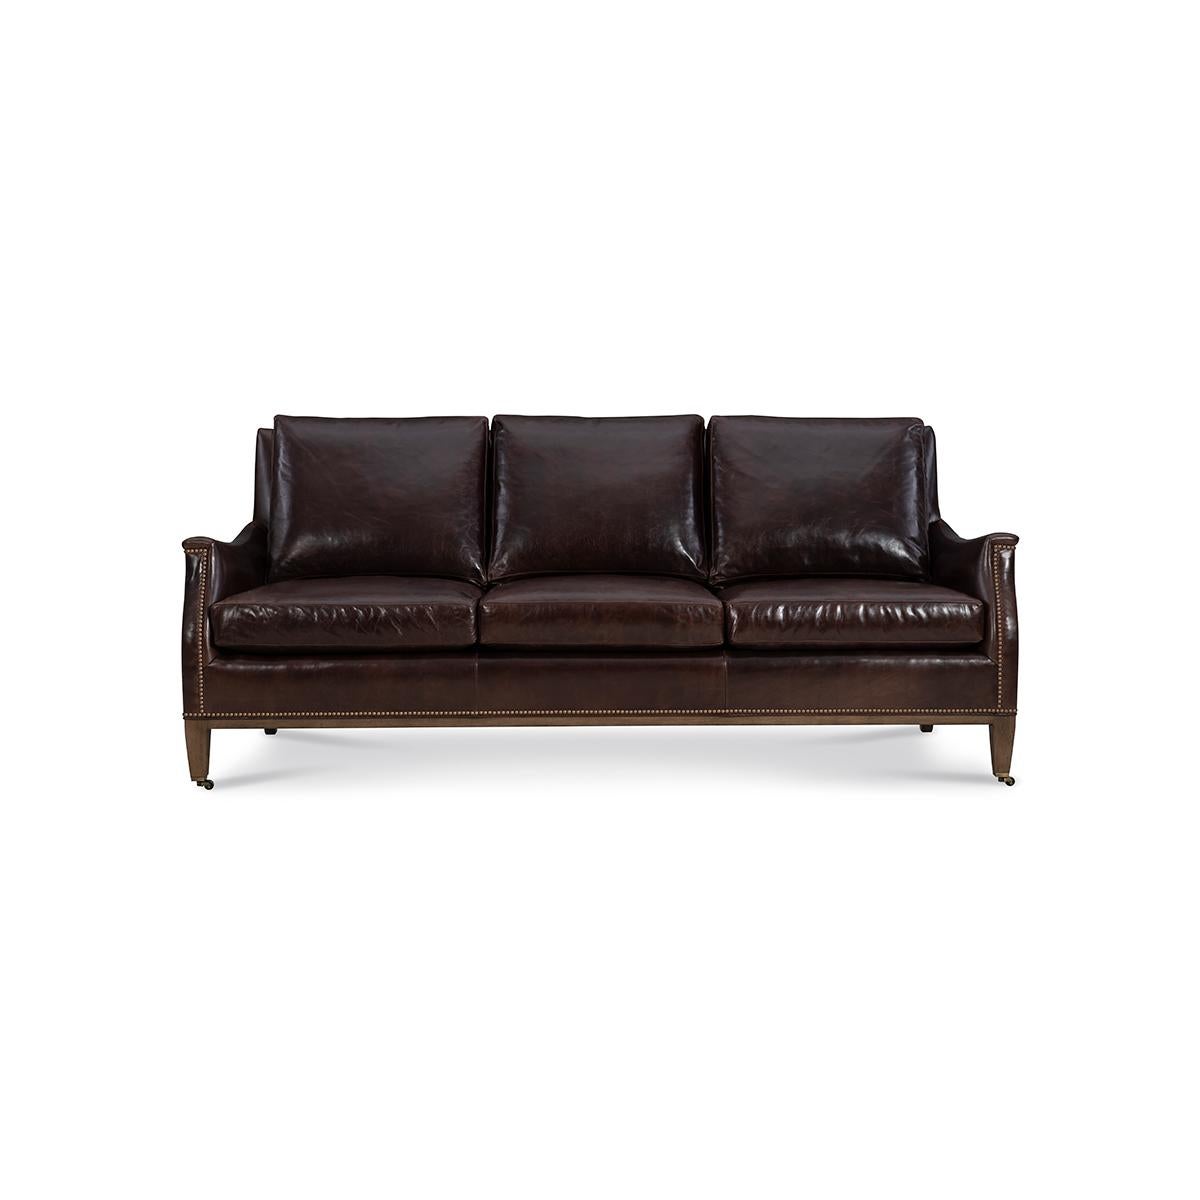 With three loose back cushions and boxed cushion seats, with scrolling arms, raised on square tapered legs, with nailhead trim details.

A classic design that works well with almost any decor. 

Completely Made in USA, with traditional 8-way